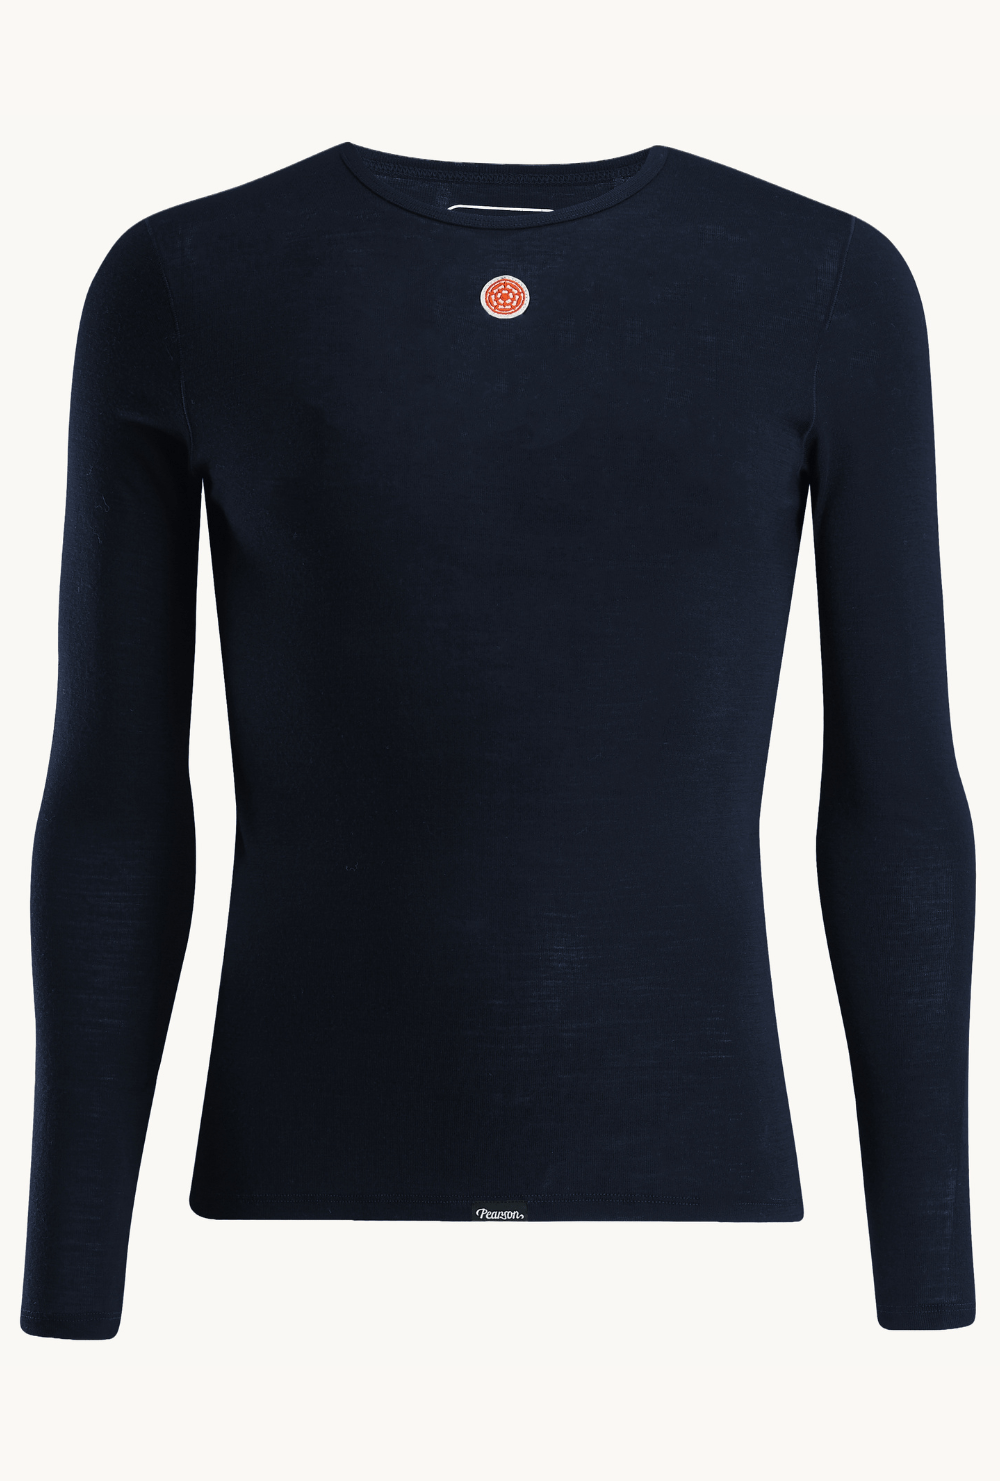 Pearson 1860  Skin In The Game - Long Sleeve Base Layer Navy Blue  Navy Blue / Small